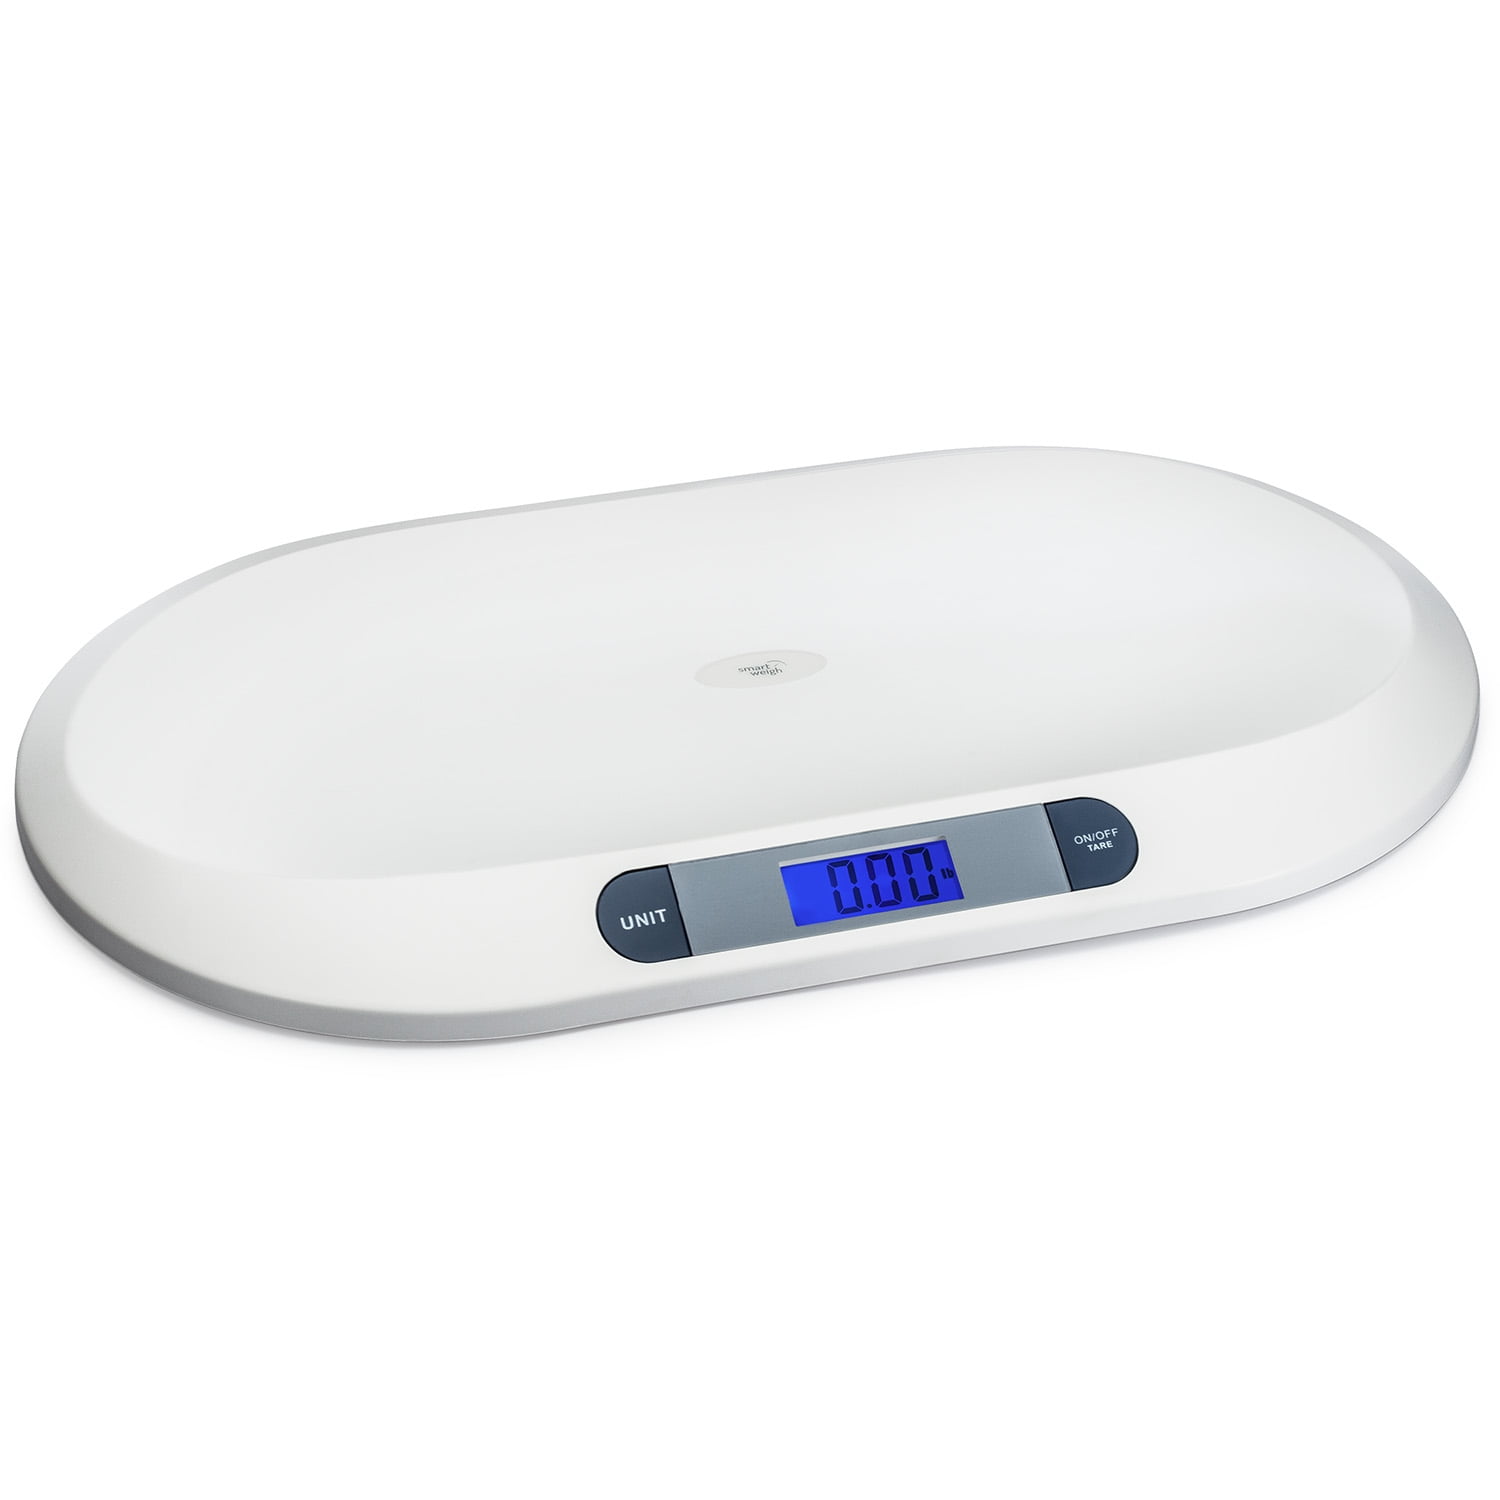 Smart Weigh Comfort Baby Scale, 44 Pound Capacity, 3 Weighing